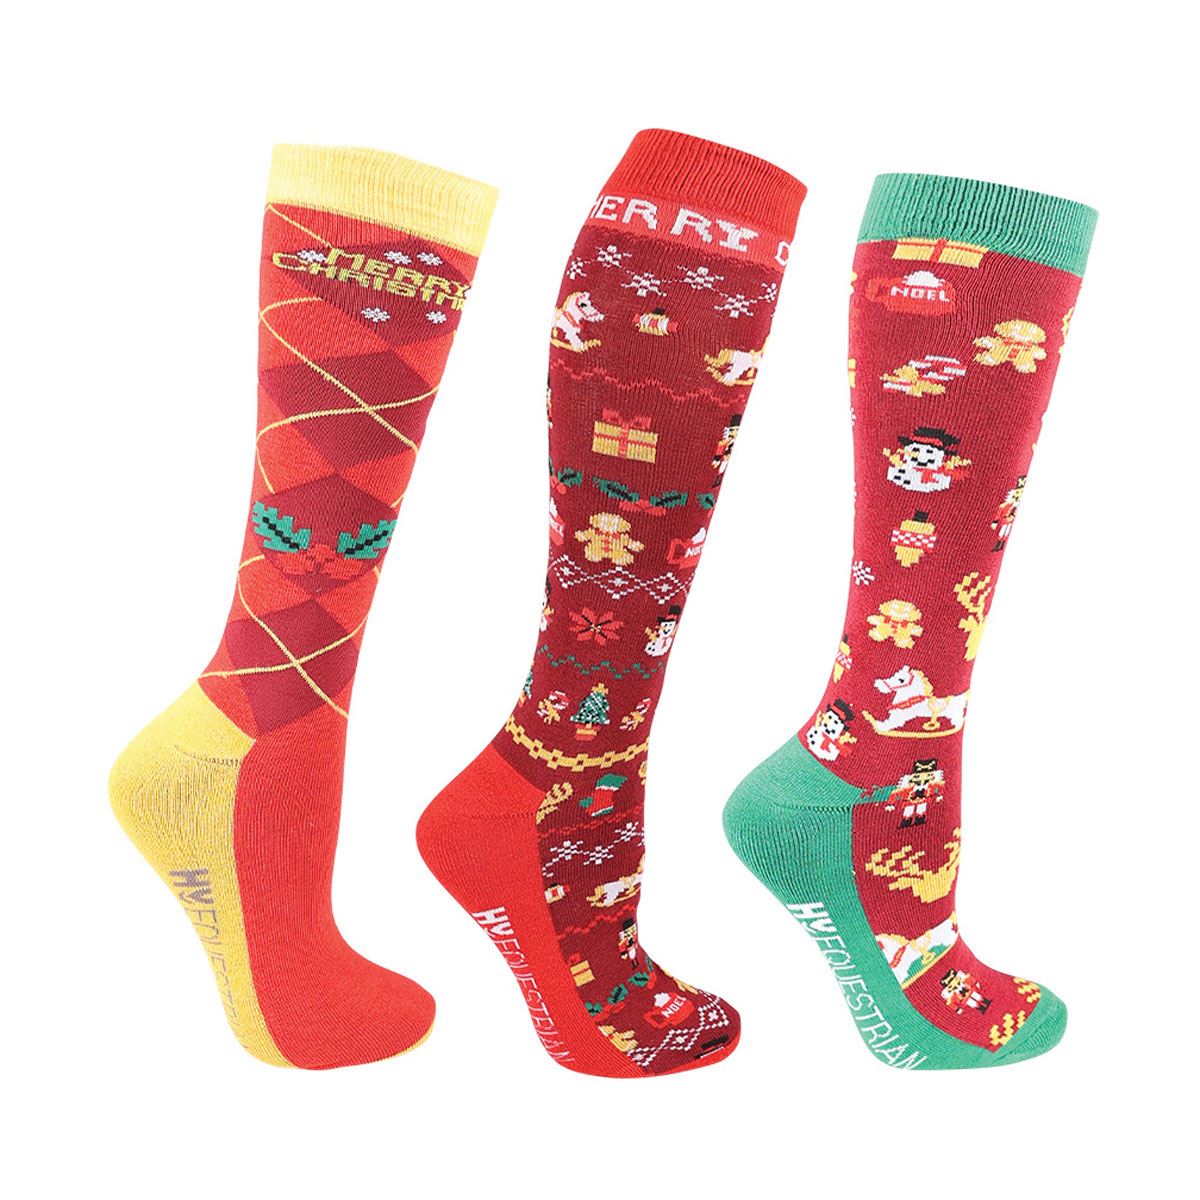 HyFASHION Christmas Cross Stitch Socks (Pack of 3) - Just Horse Riders